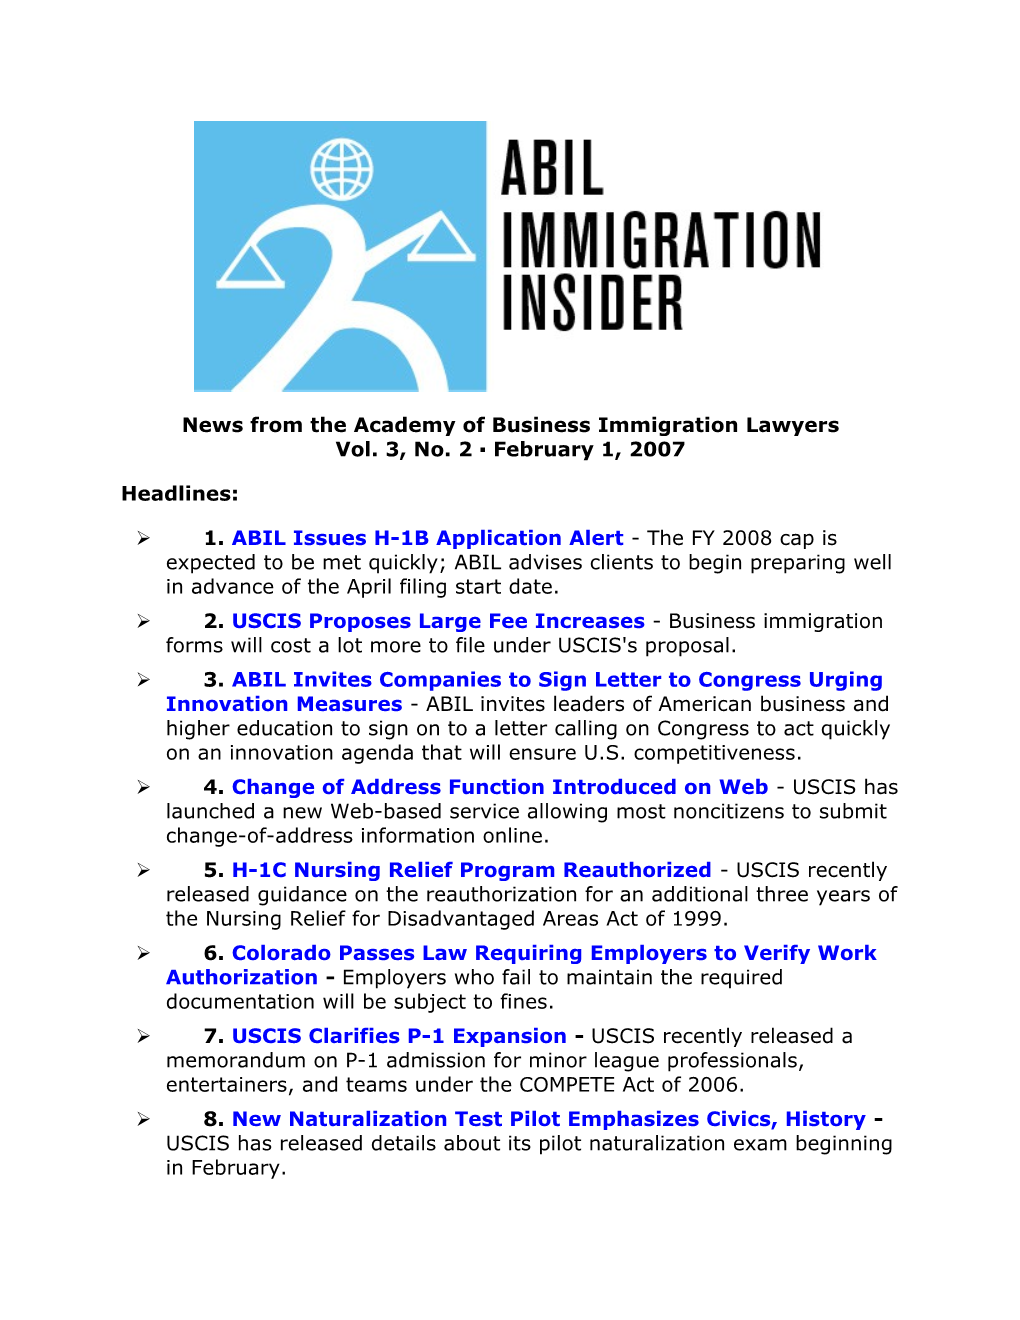 News from the Academy of Business Immigration Lawyers Vol. 3, No. 2 February 1, 2007